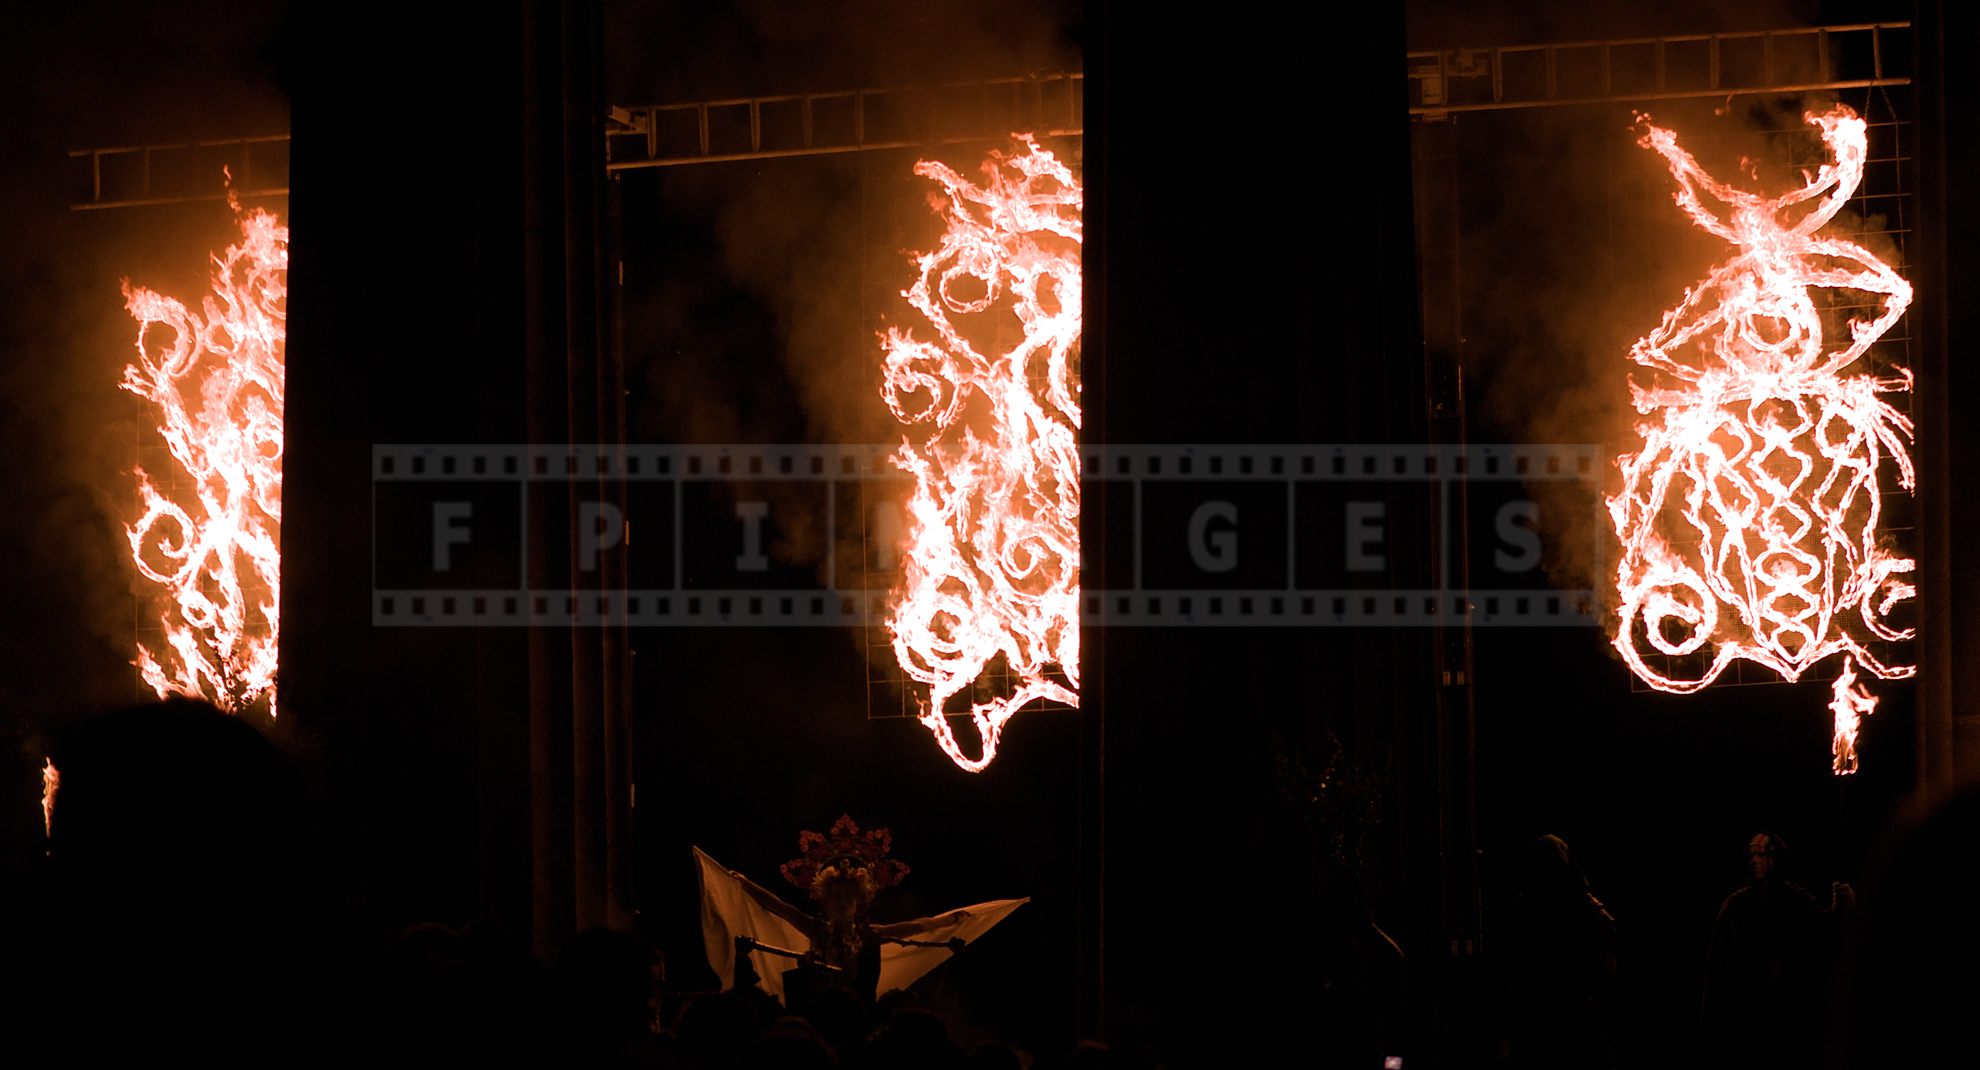 May Queen spreading her arms under the flames at the very start of the festival